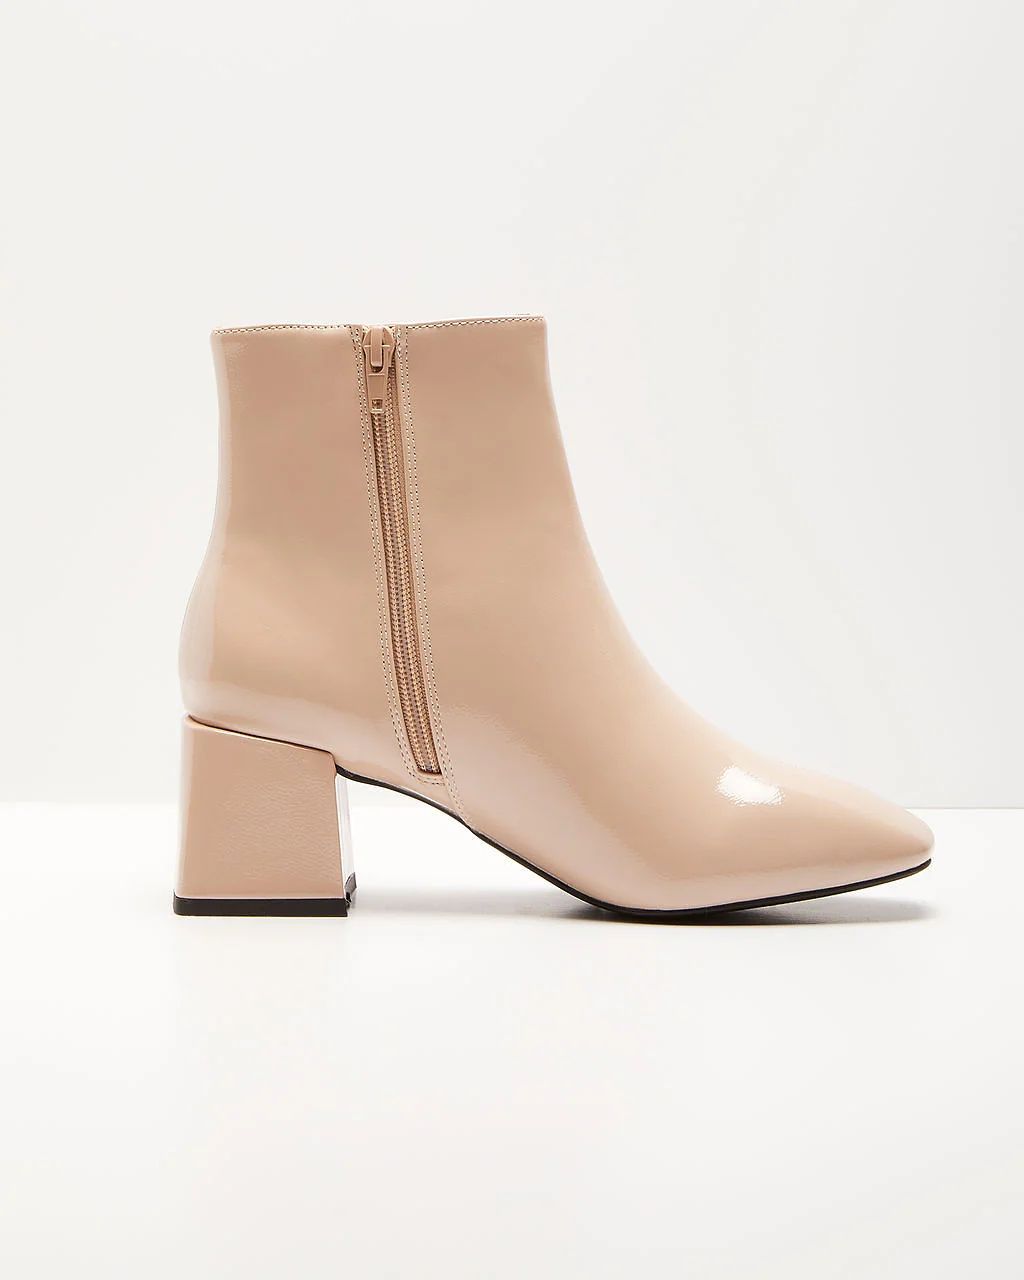 Kelce Patent Faux Leather Ankle Booties | VICI Collection